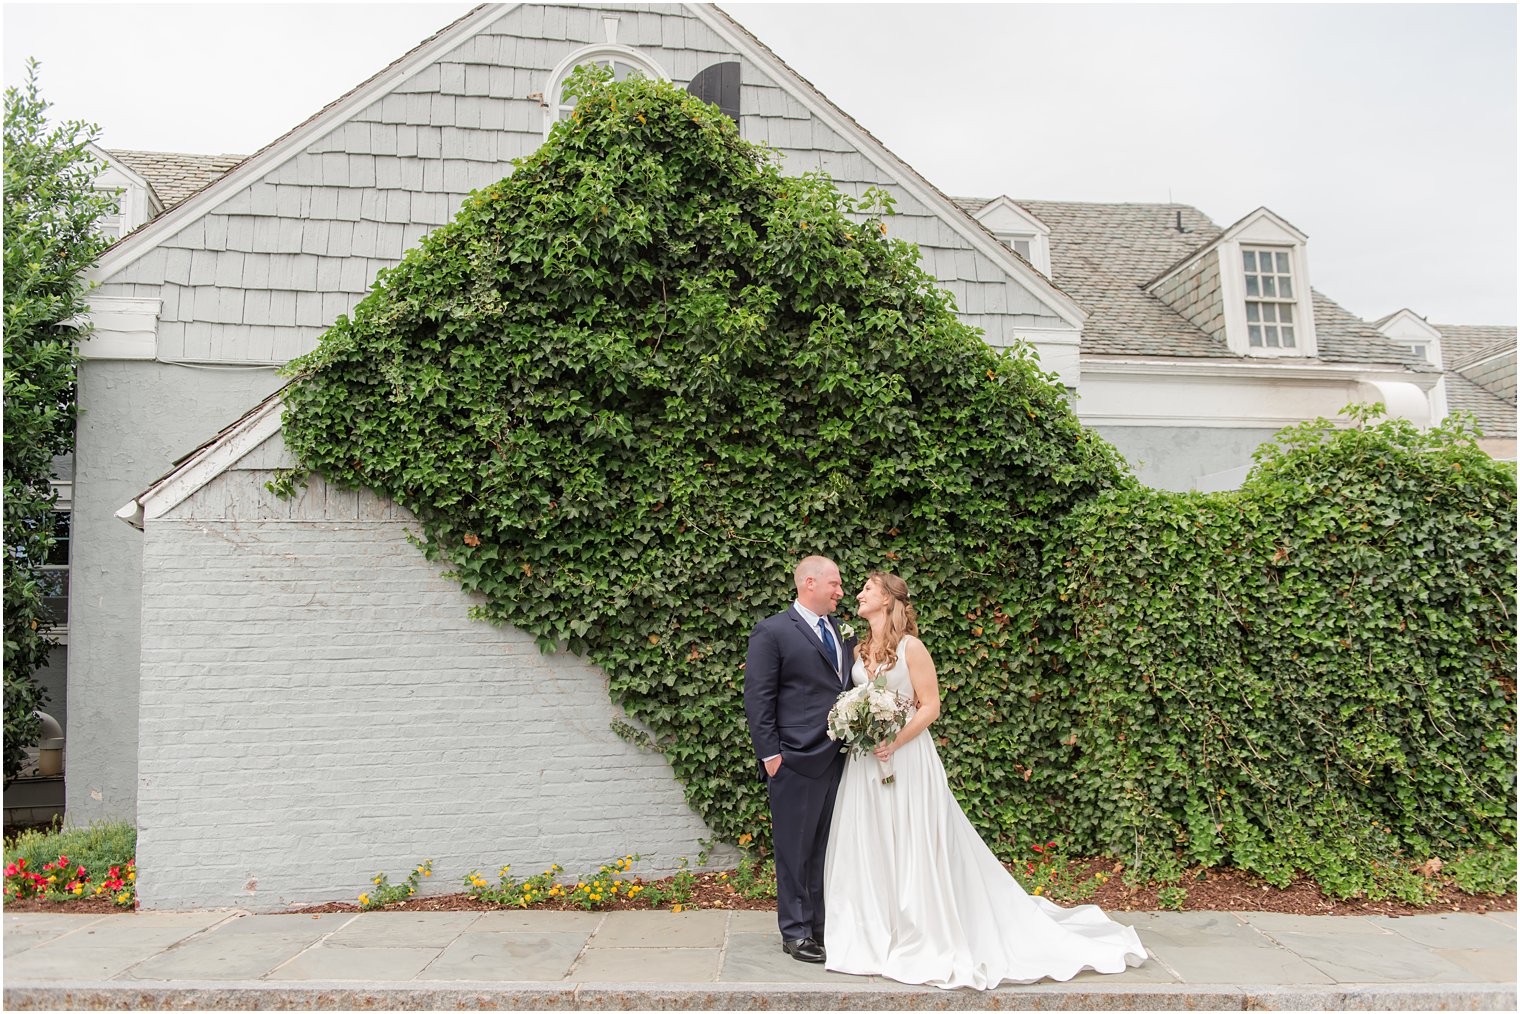 quiet moment between bride and groom along ivy covered wall at Forsgate Country Club